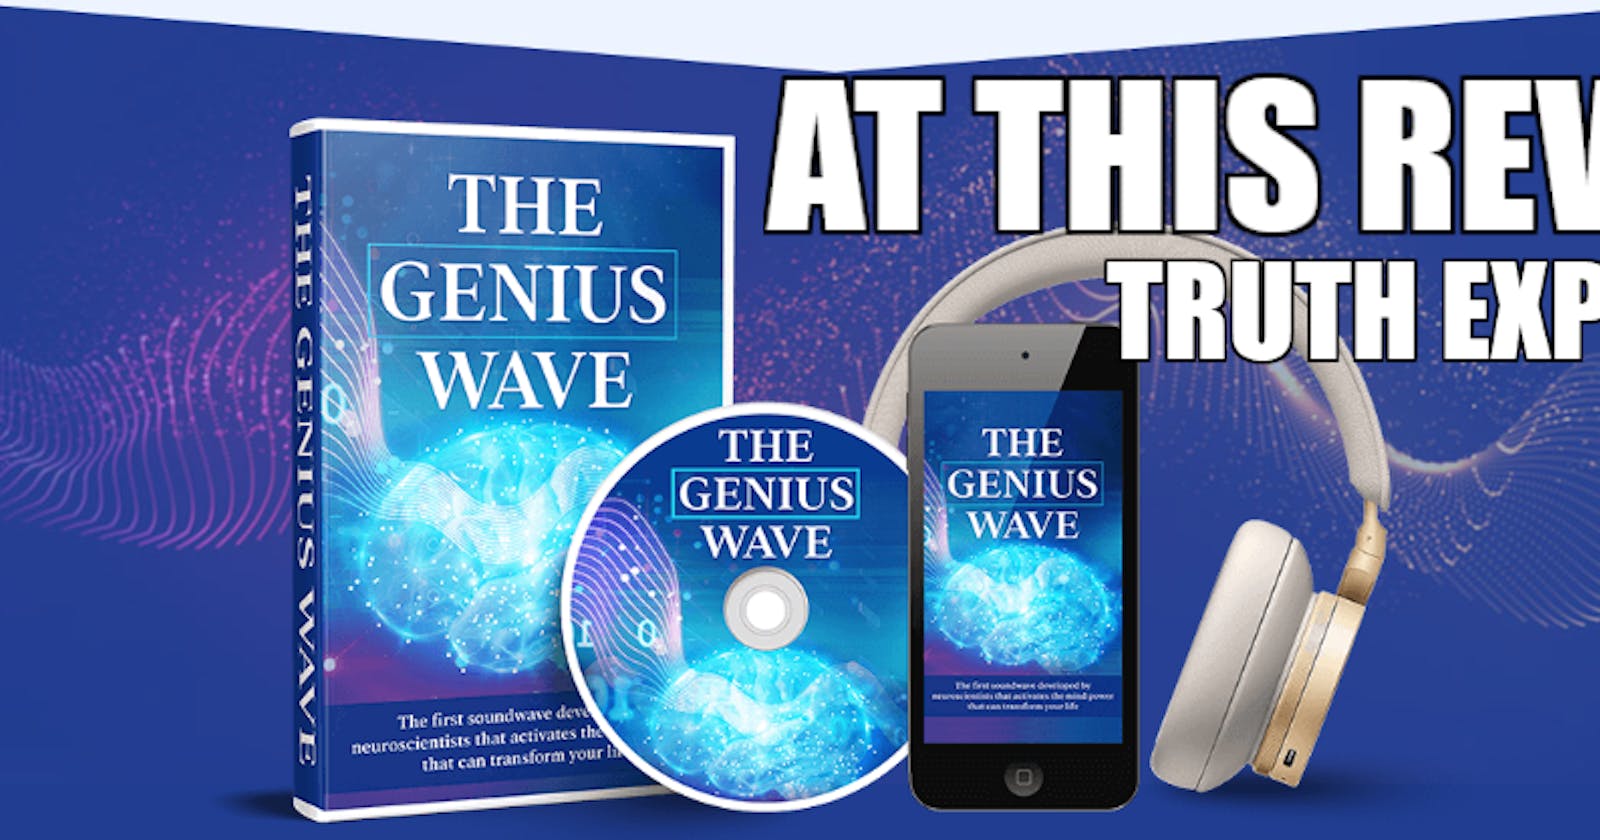 What historical examples demonstrate the effects of "The Genius Wave" on societal progress?